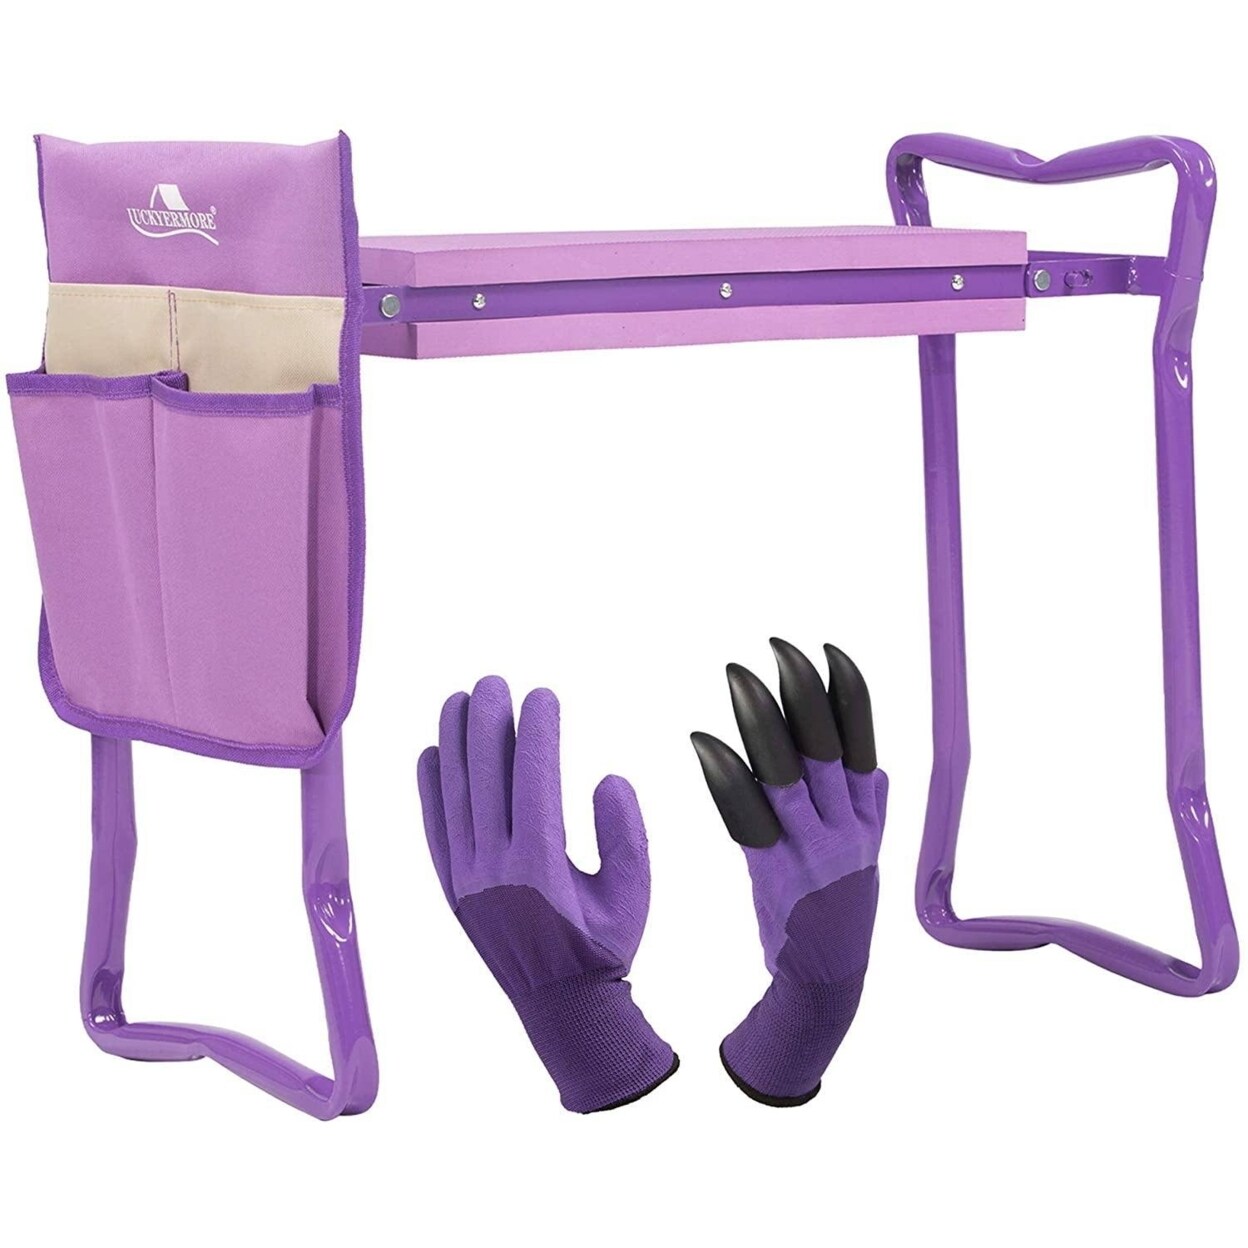 SKUSHOPS Garden Kneeler and Seat Folding Kneeling Bench Stool with Tool Pouches Soft EVA Foam for Gardening Purple